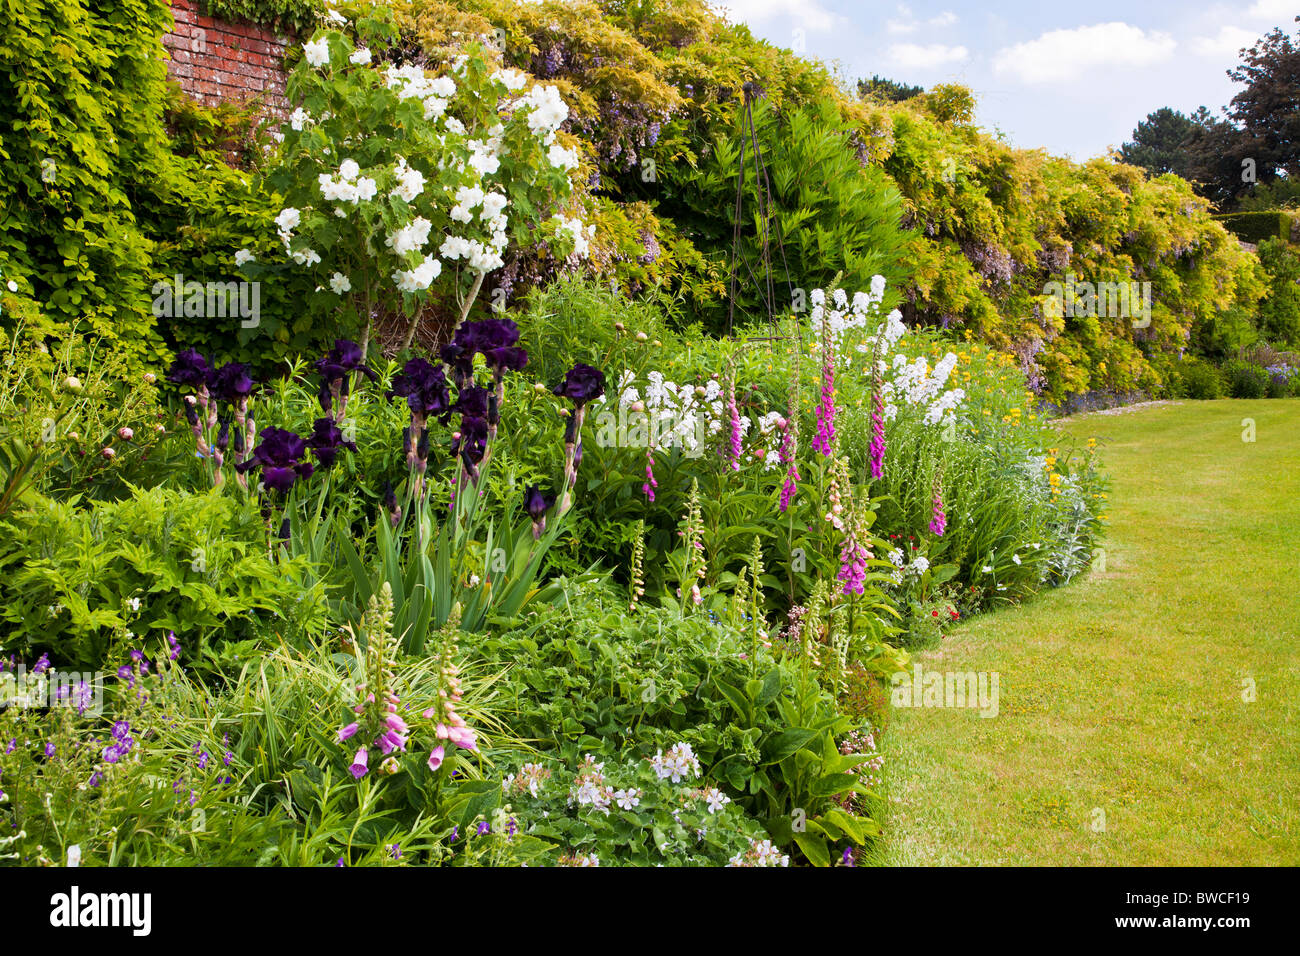 A wavy herbaceous perennial border against a wall at the edge of a lawn in an English country summer garden Stock Photo